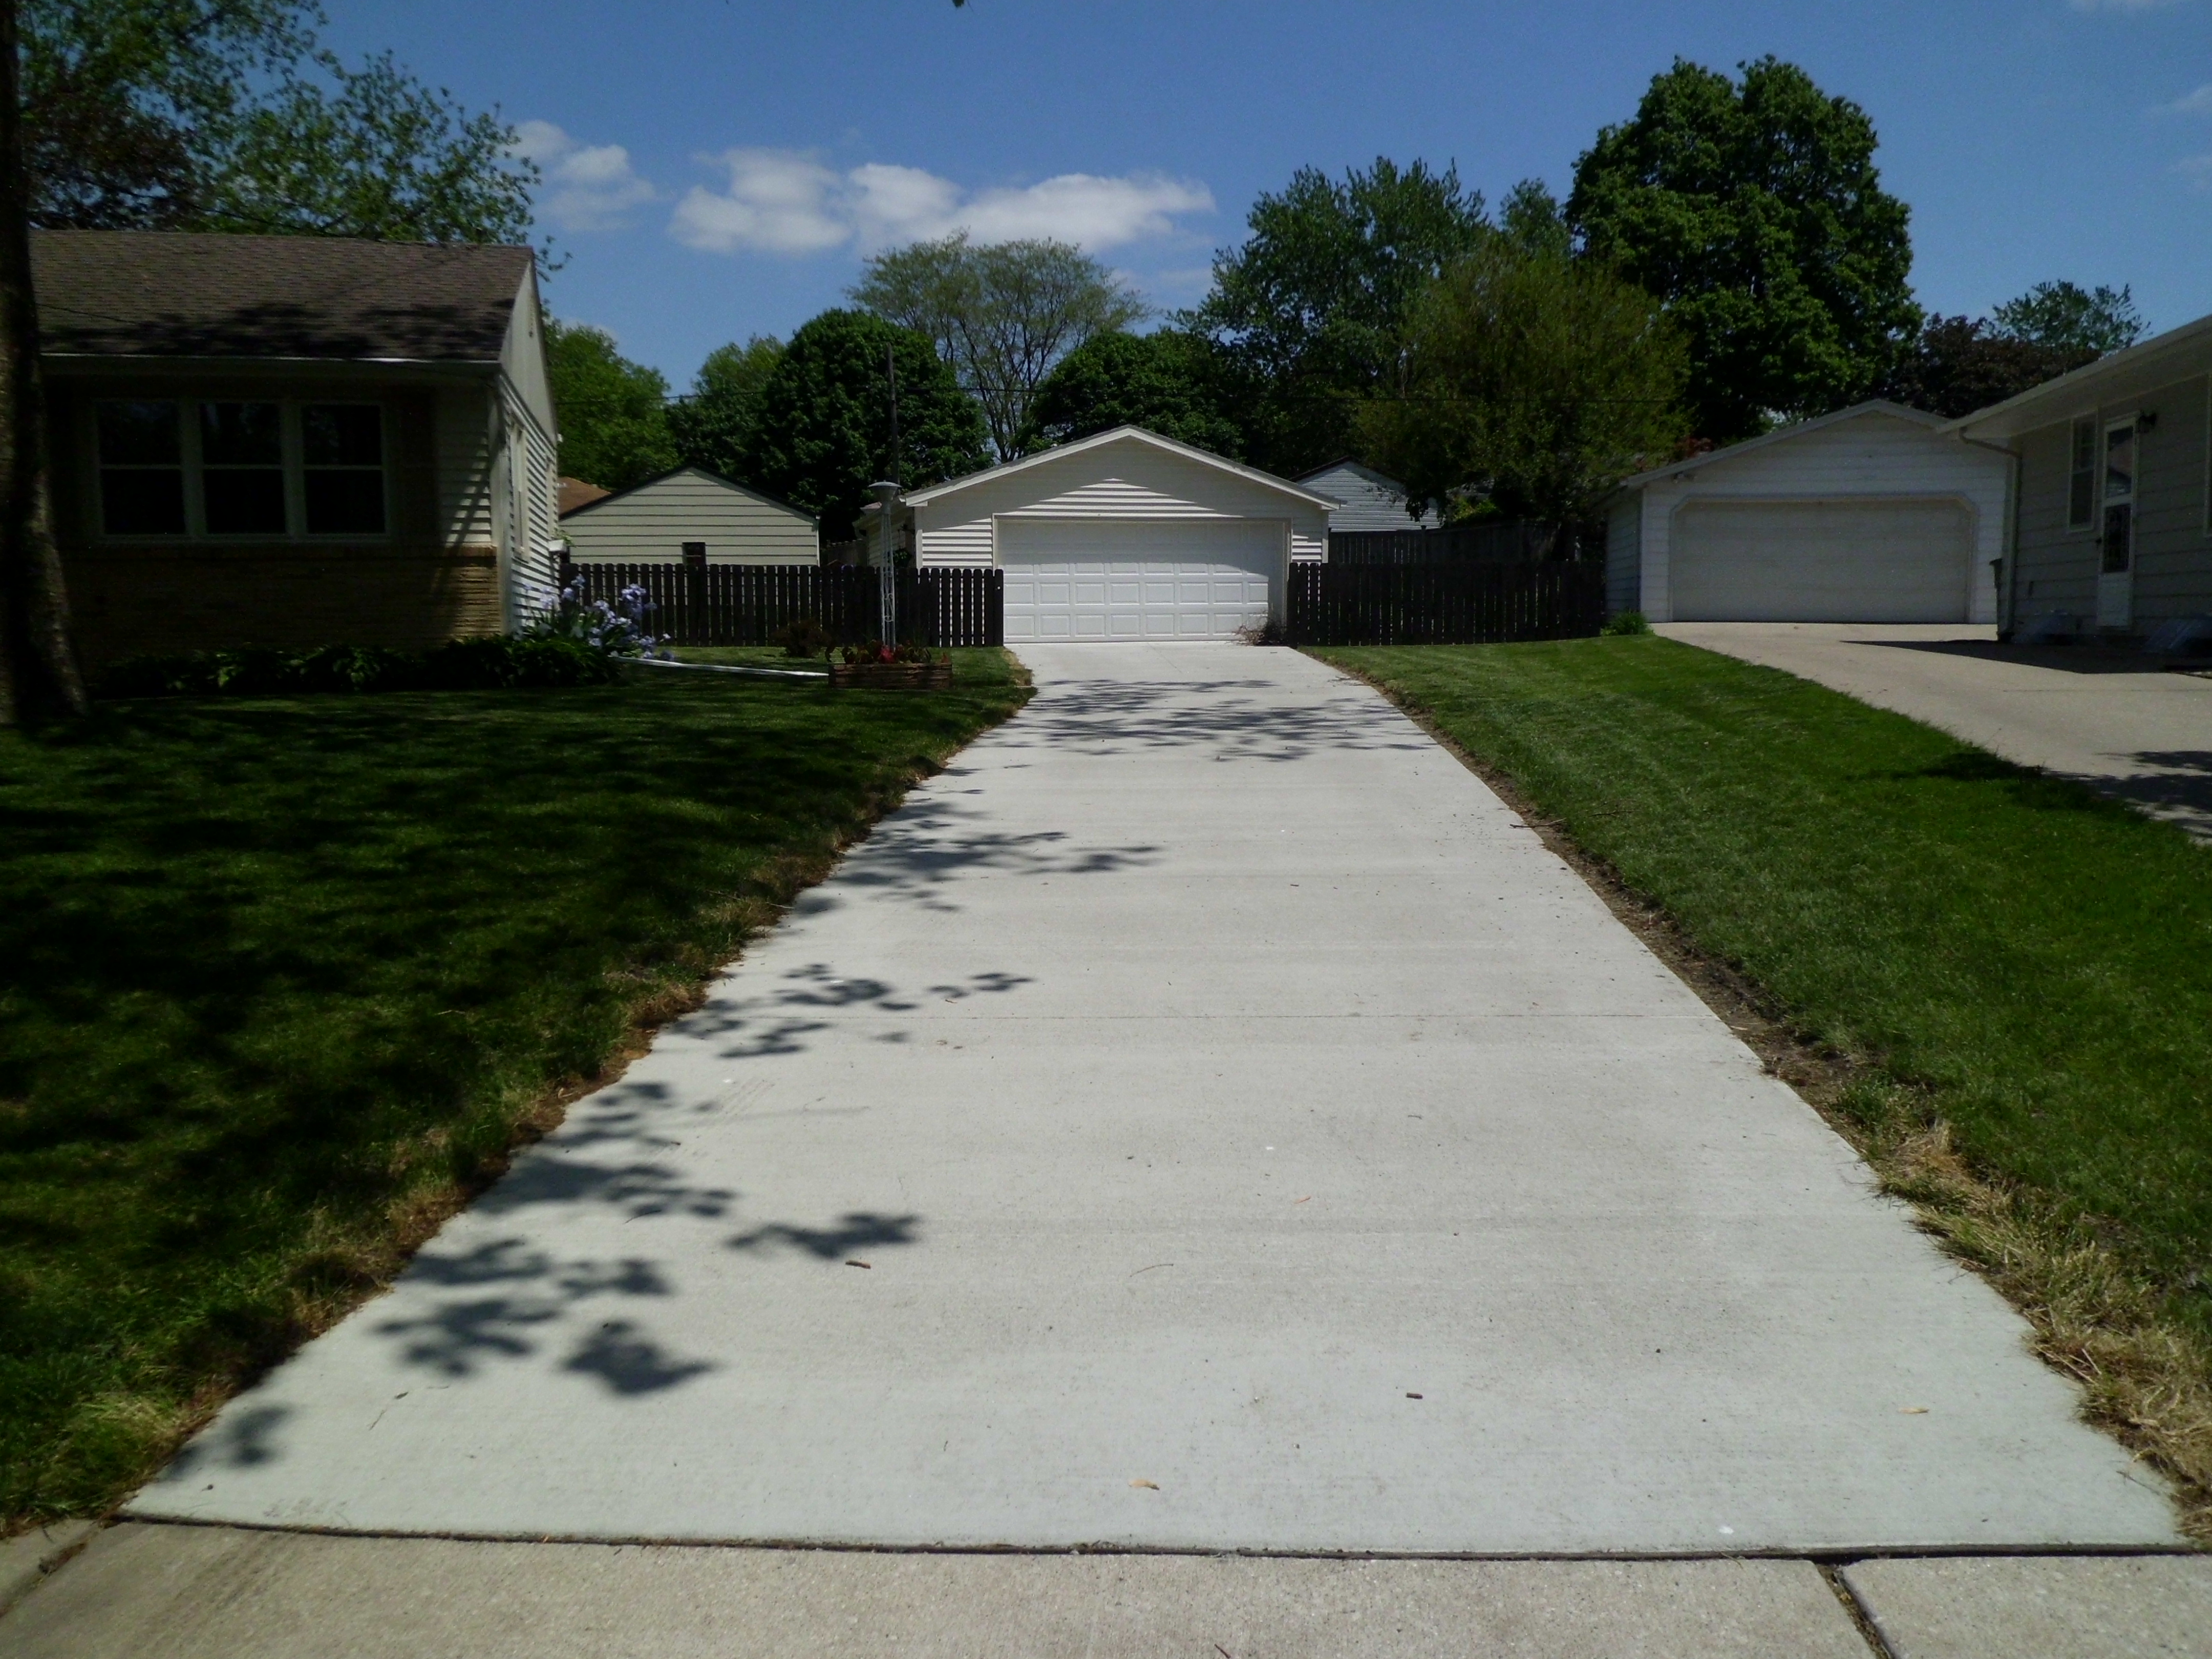 Completed Driveways - Terry's Quality Concrete